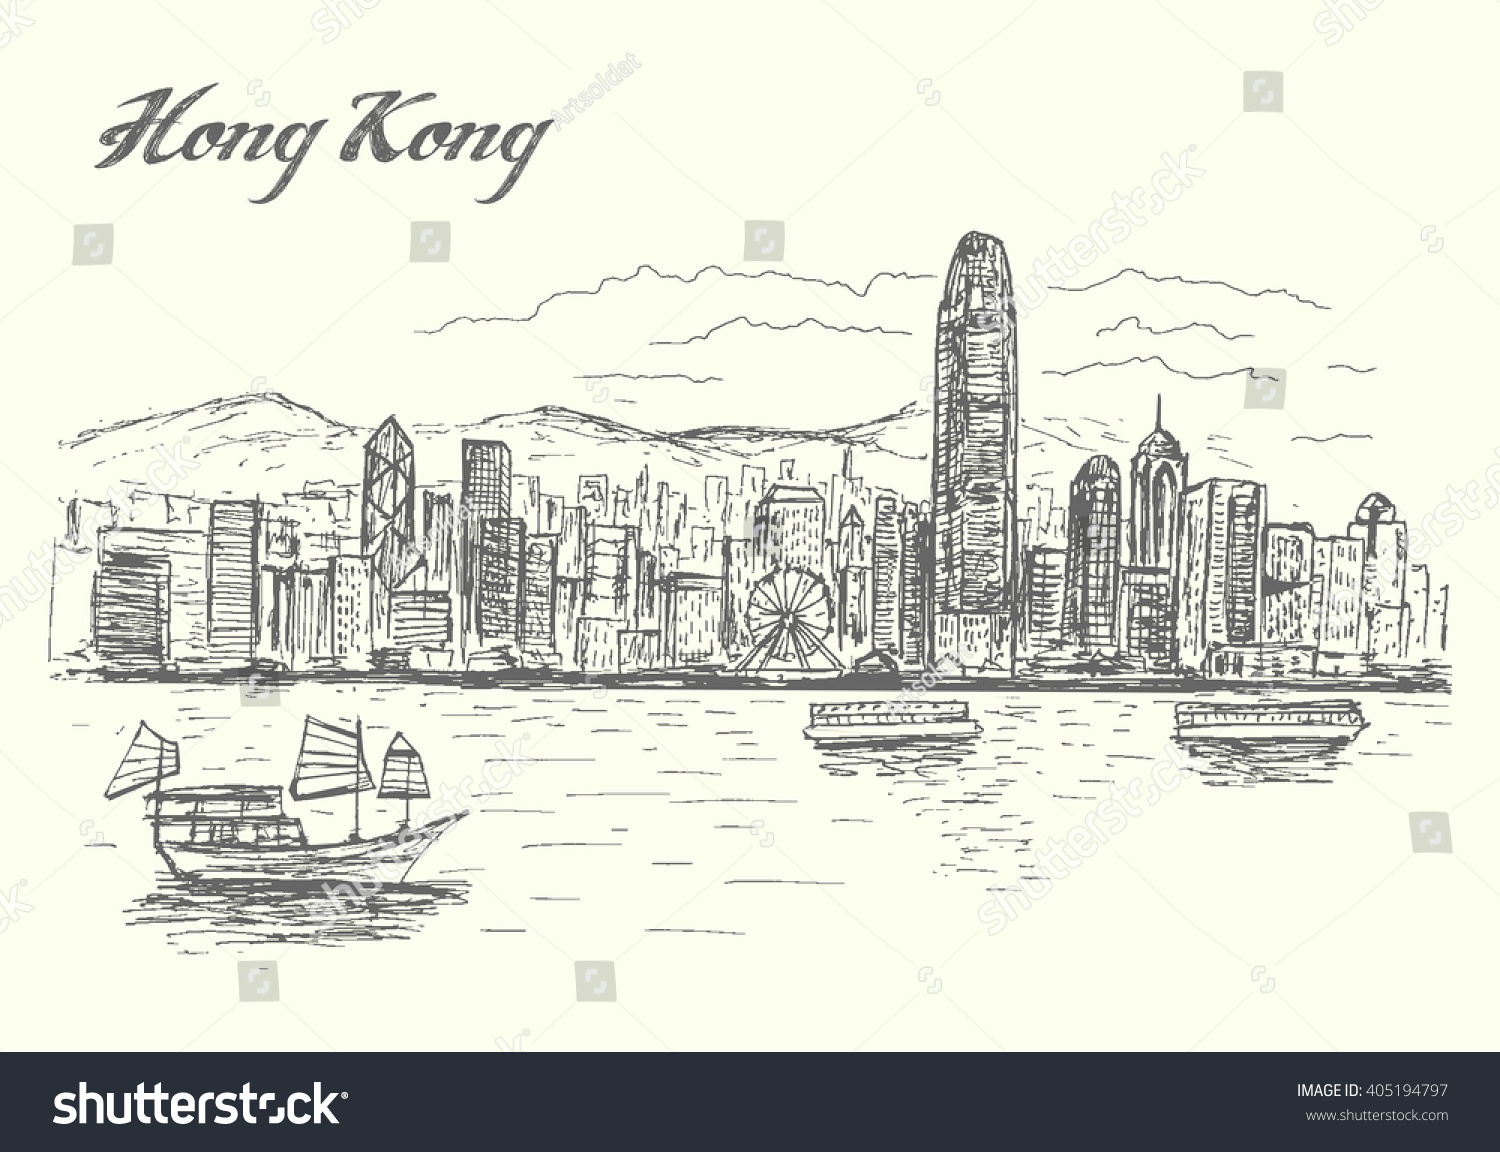 Hong Kong Skyline,Hand Drawn,Sketch Style,Isolated,Vector,Illustration